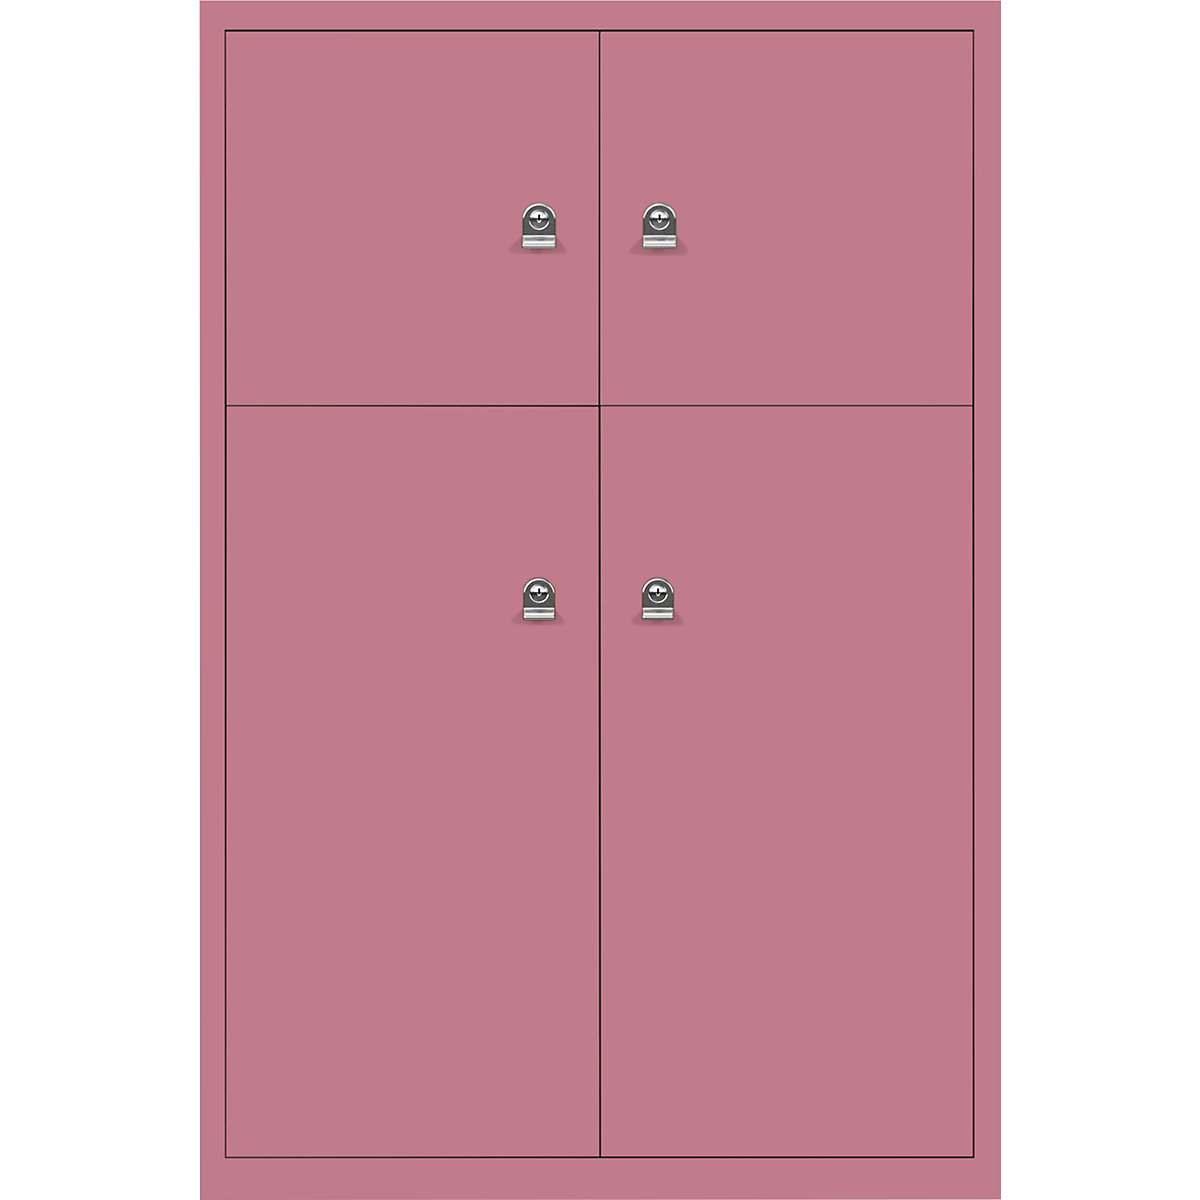 Armoire à casiers LateralFile™ – BISLEY, 4 casiers, hauteur 2 x 375 mm, 2 x 755 mm, rose-6